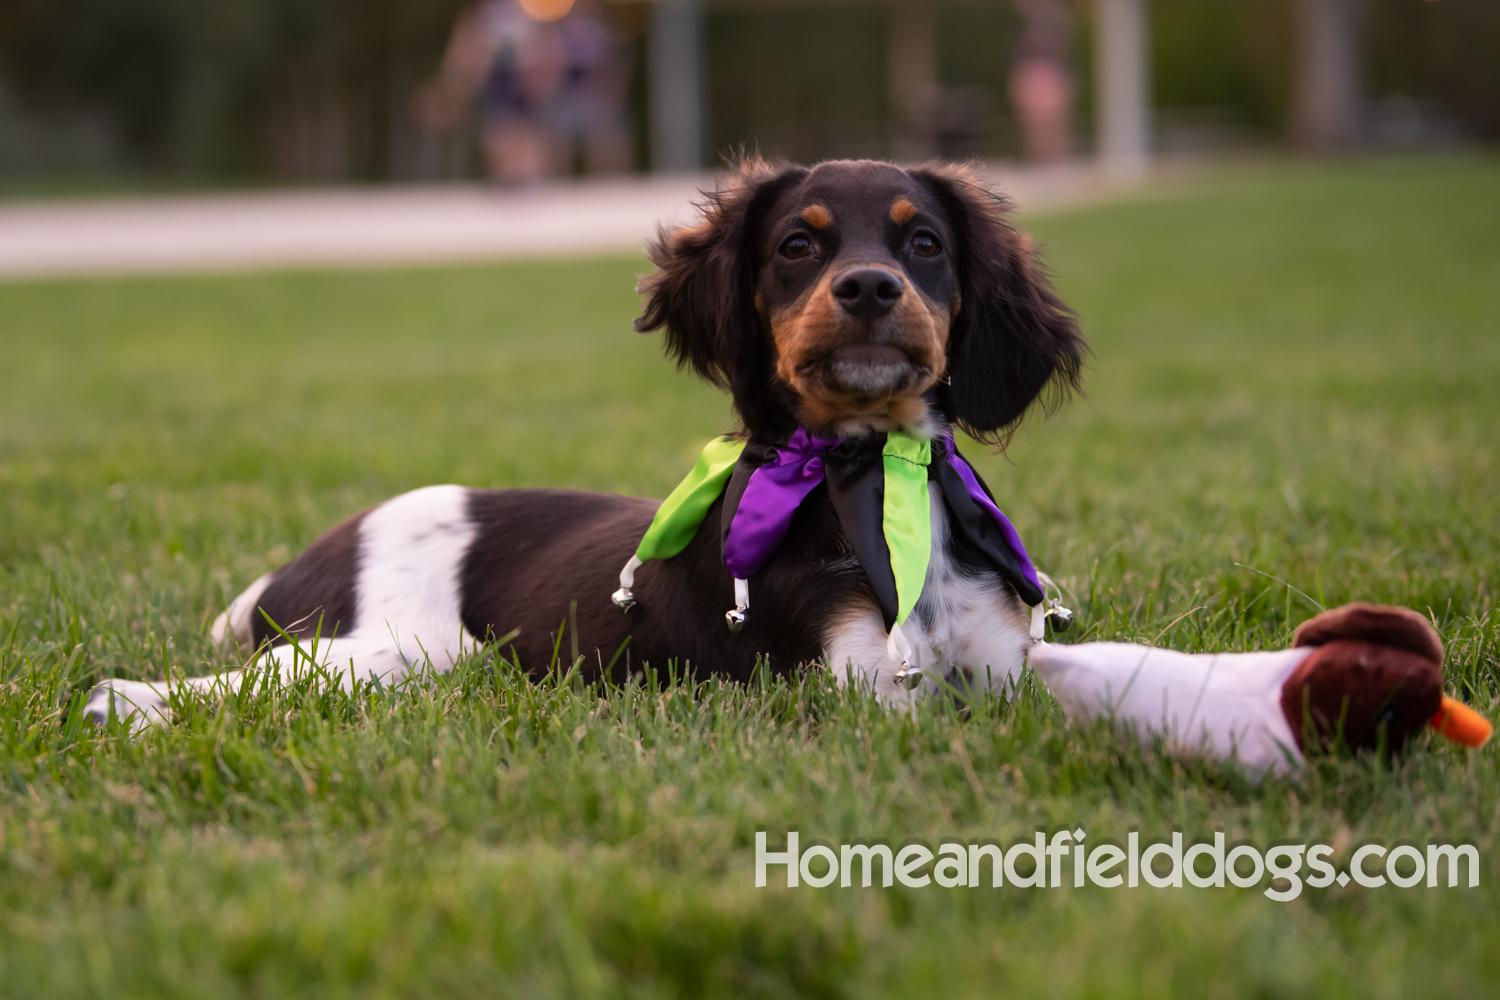 Tricolor french brittany puppies playing with toys in a field wearing halloween costumes